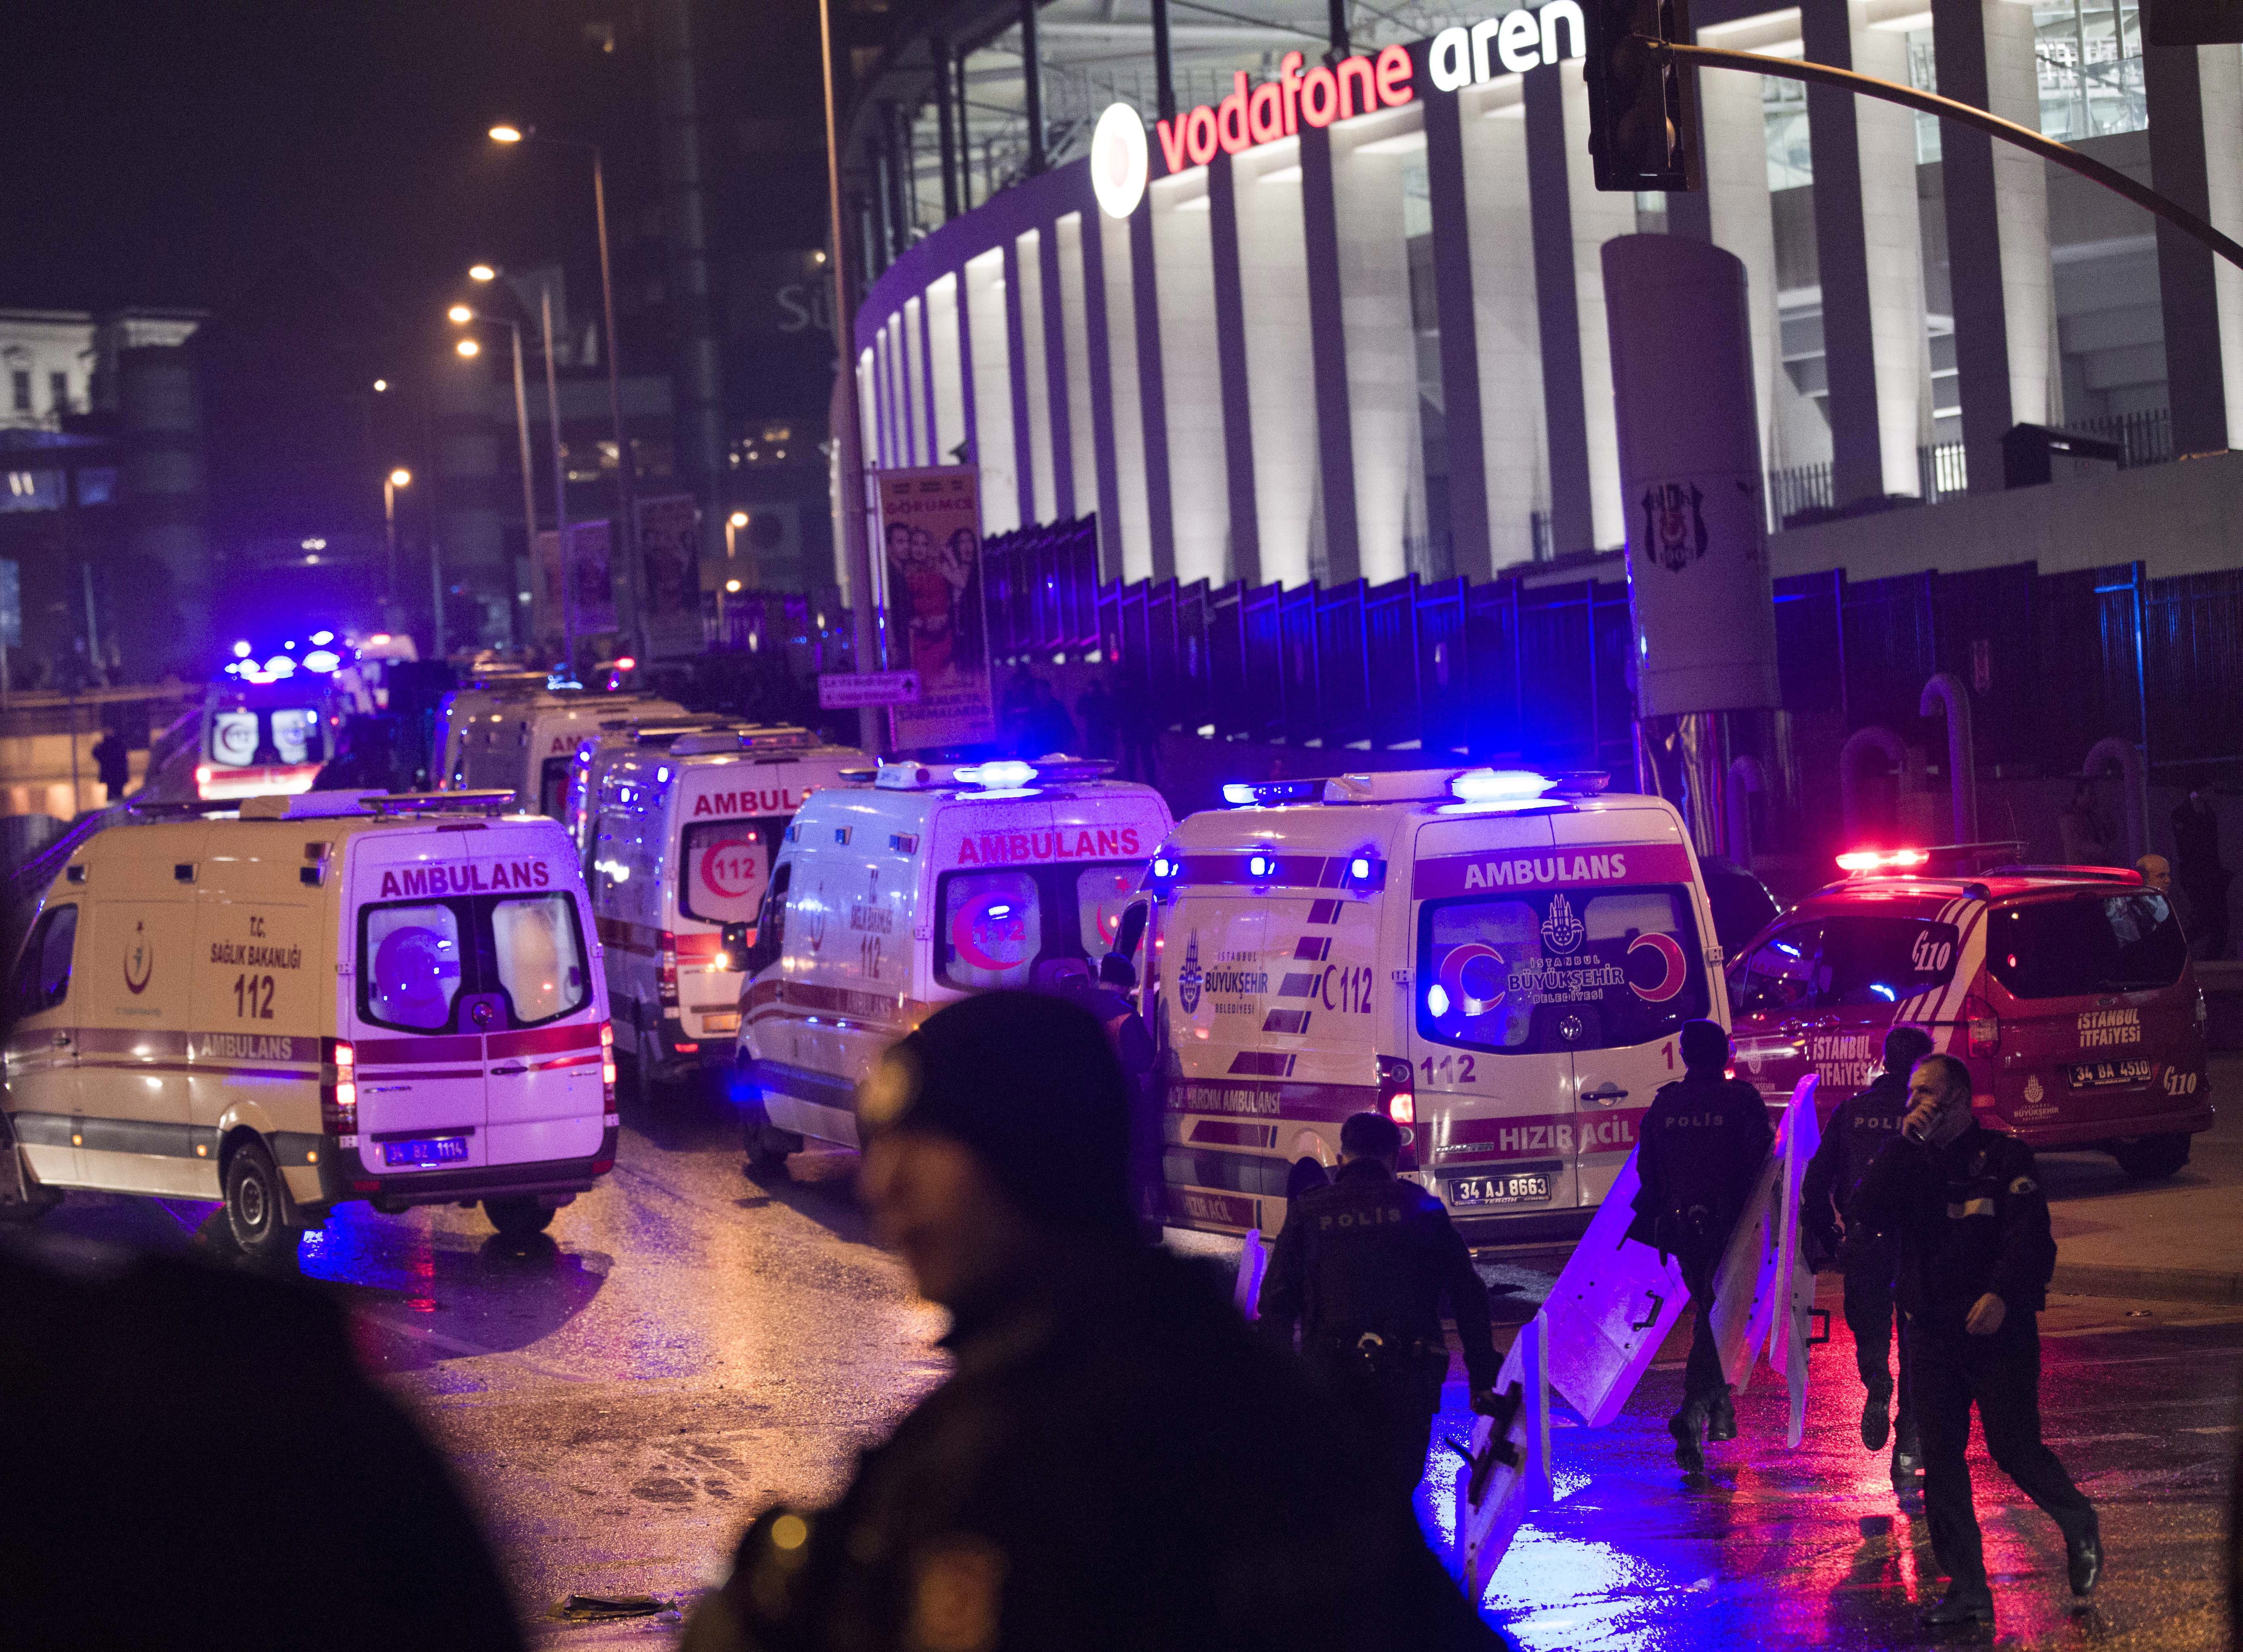 Police officers and ambulances fill the street next to the Besiktas football club stadium, in Istanbul, late Saturday, Dec. 10, 2016. Two loud explosions have been heard near the newly built soccer stadium and witnesses at the scene said gunfire could be heard in what appeared to have been an armed attack on police.Turkish authorities have banned distribution of images relating to the Istanbul explosions within Turkey.